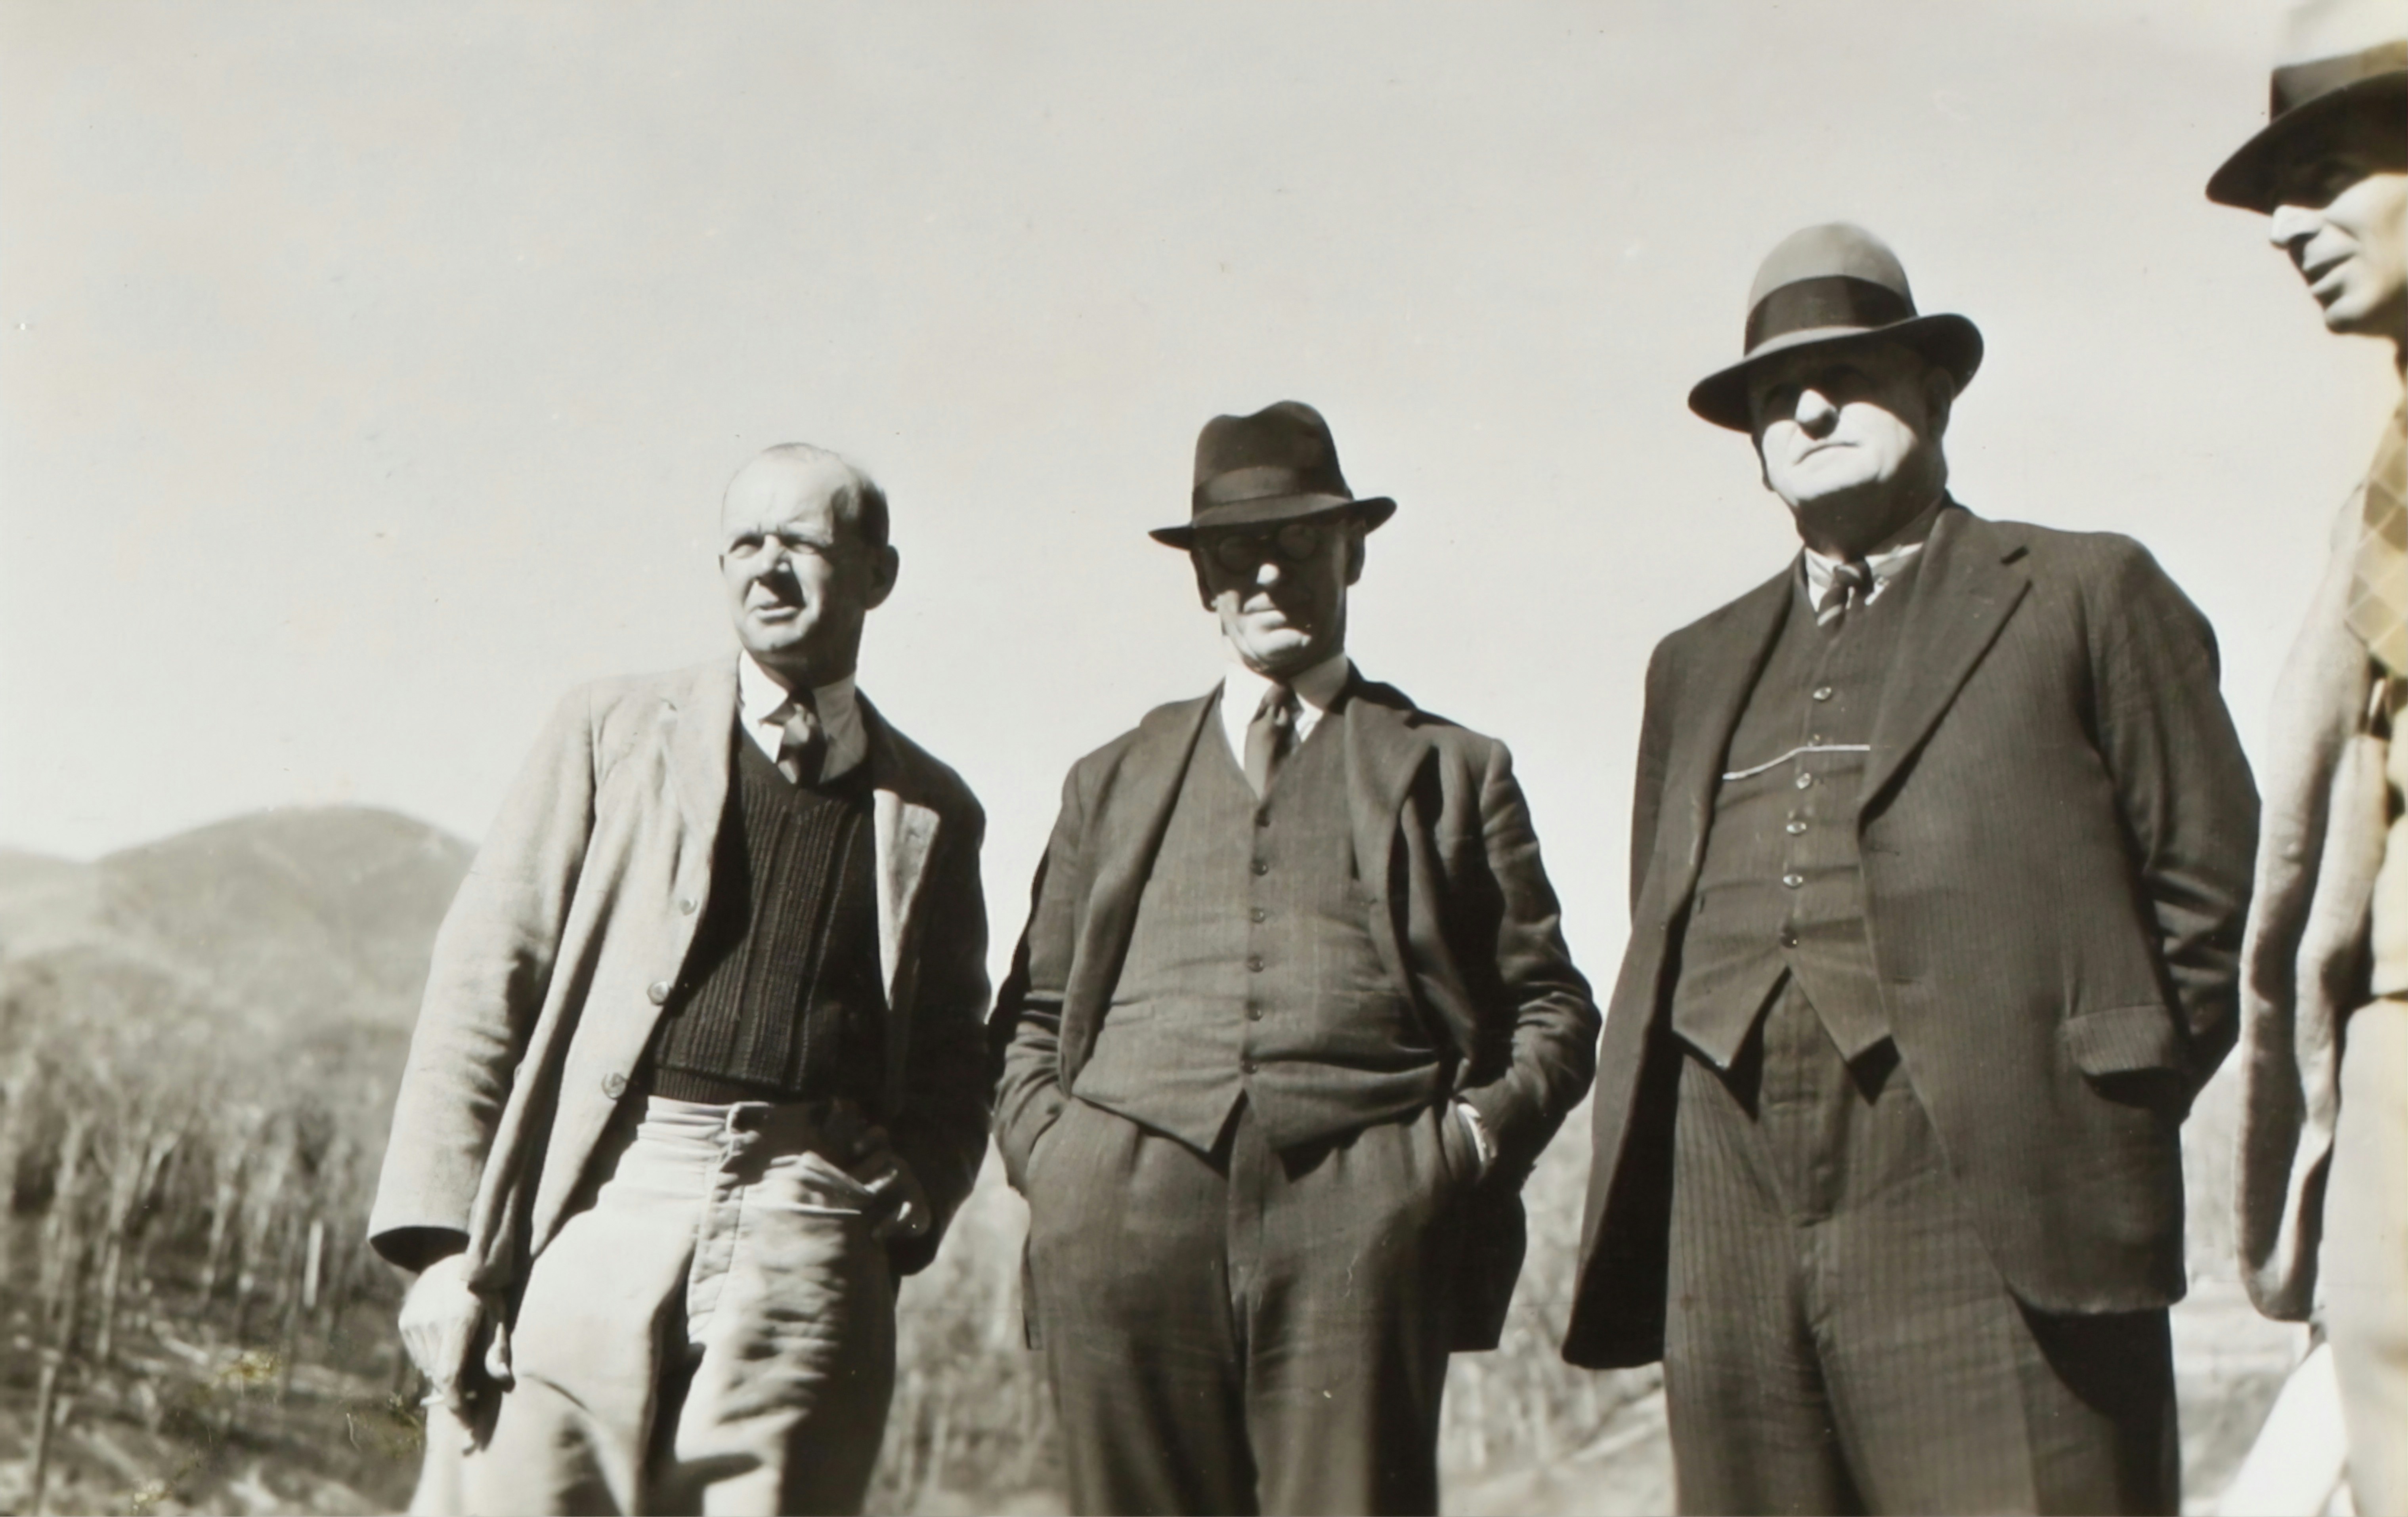 State Electricity Commission, Group of Four Men, Victoria, May 1940